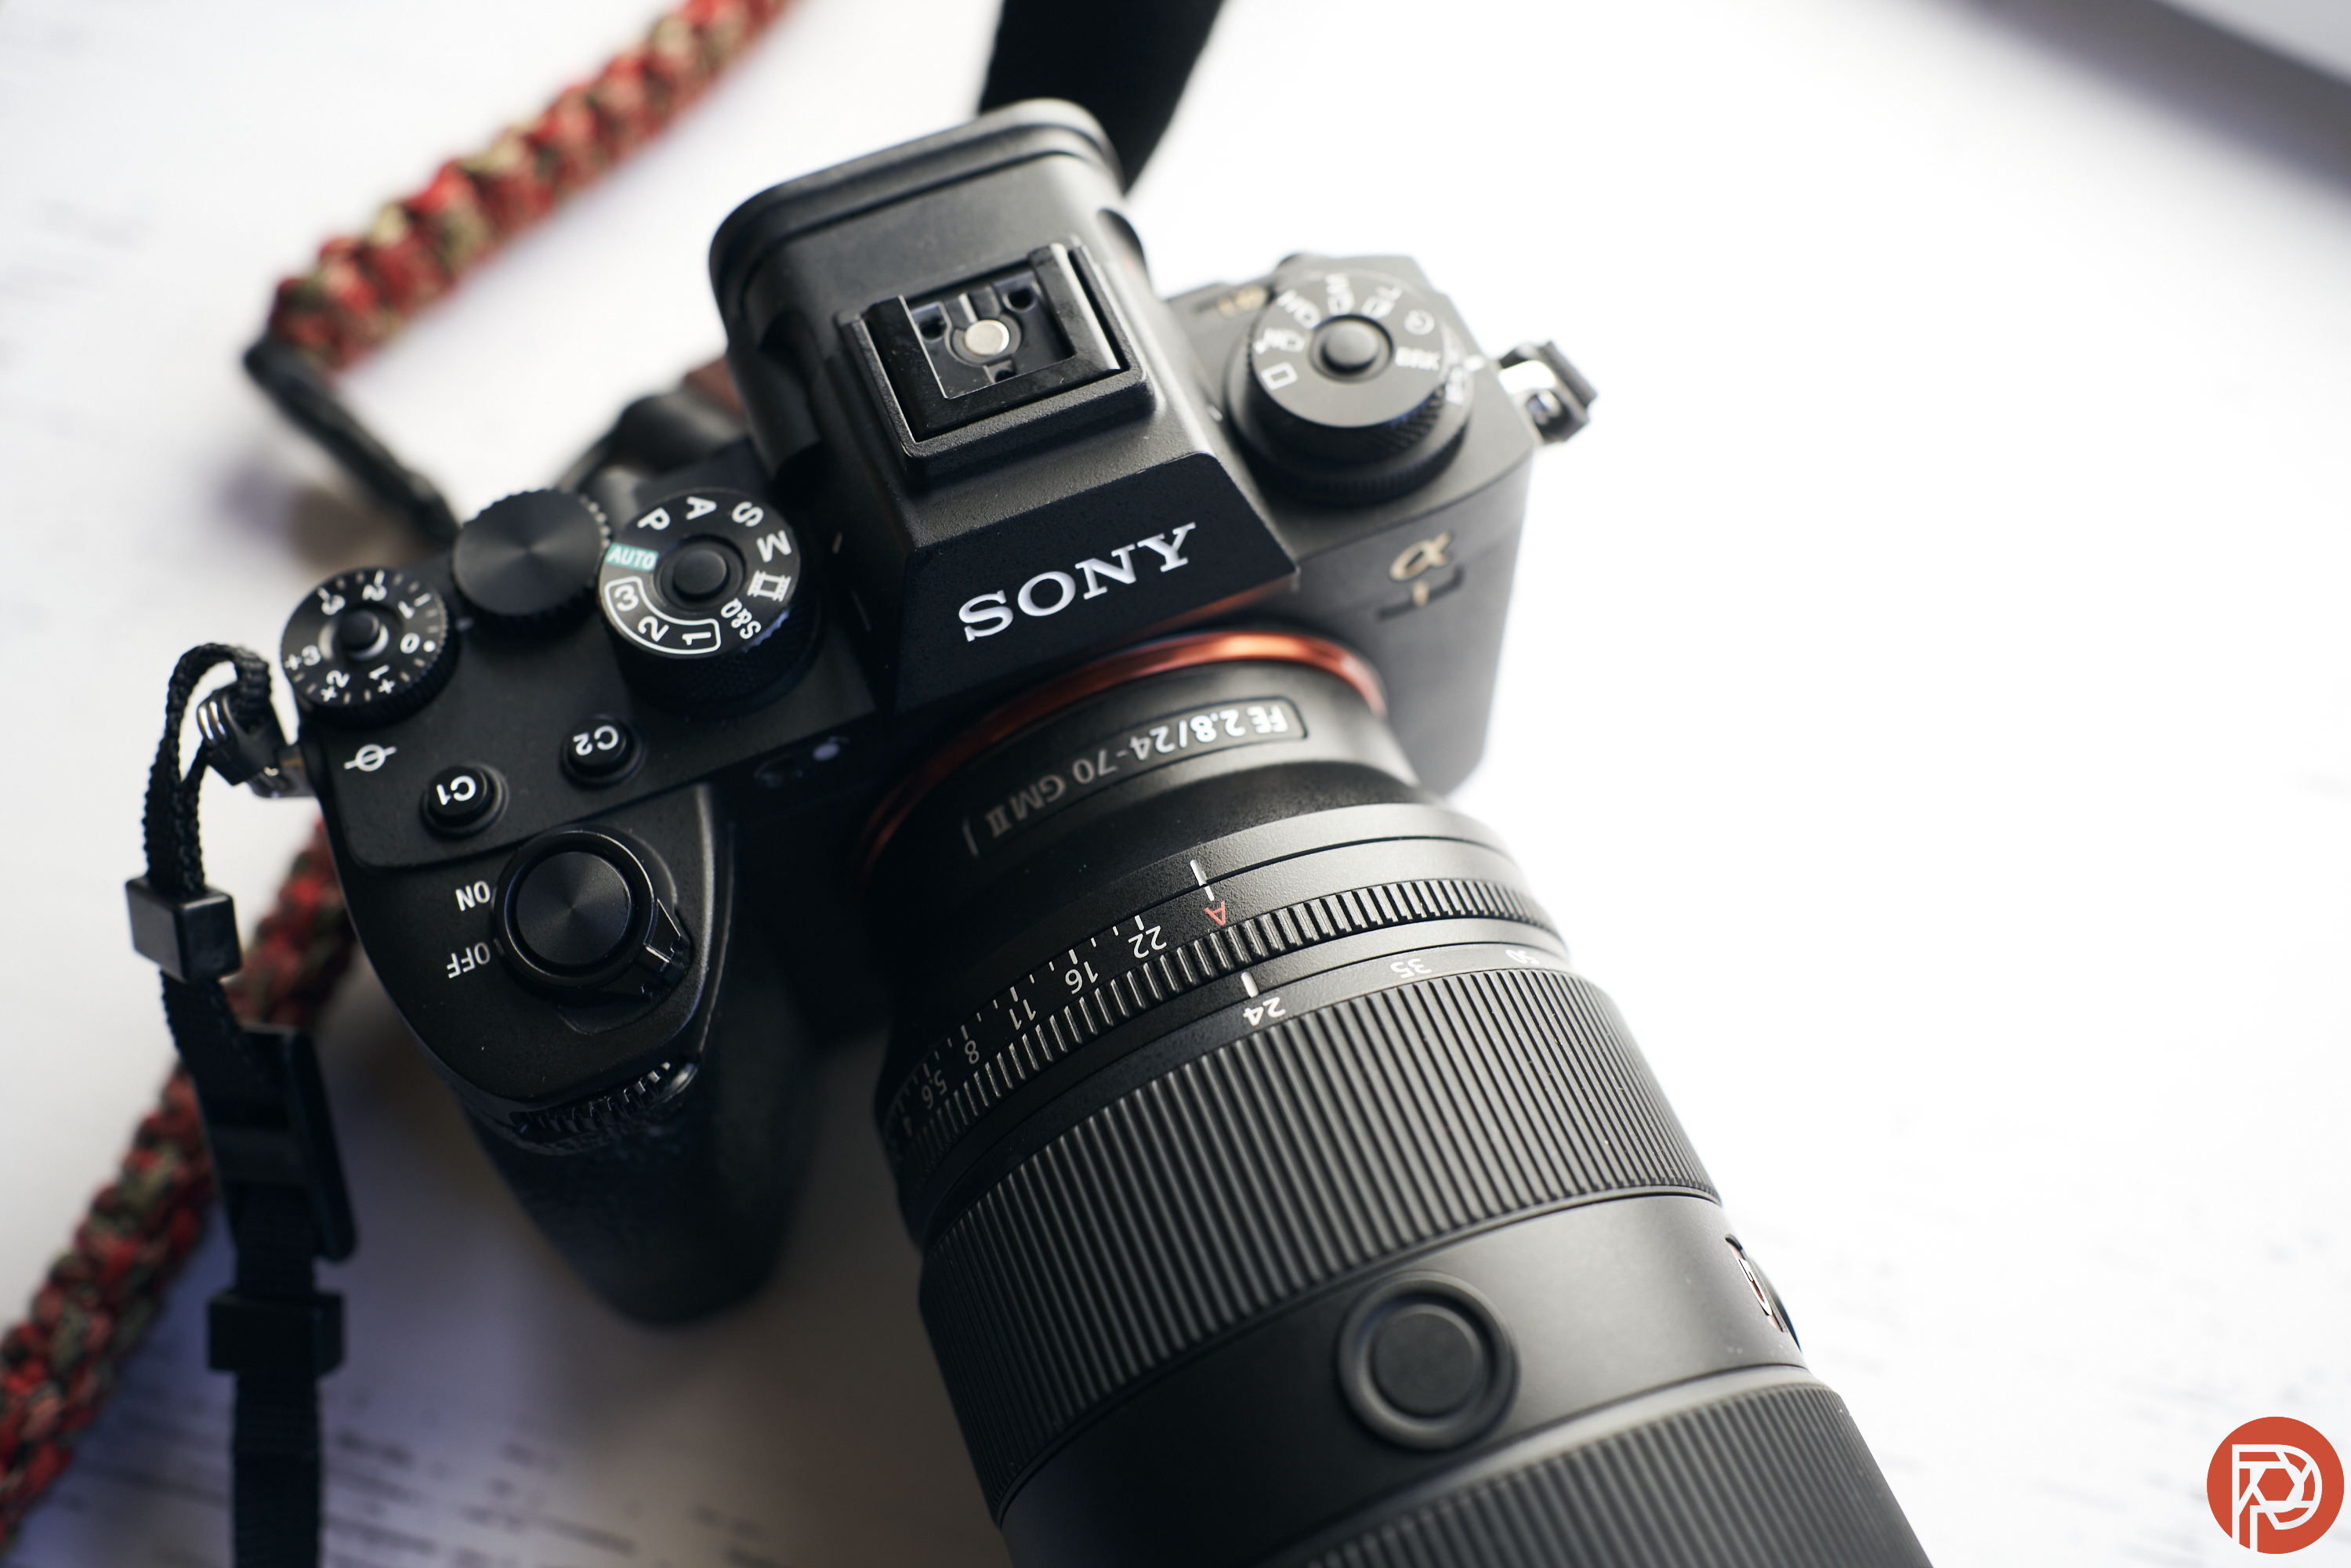 Chris Gampat The Phoblographer sony 24-70mm f2.8 G Master II review product images 41-80s400 7